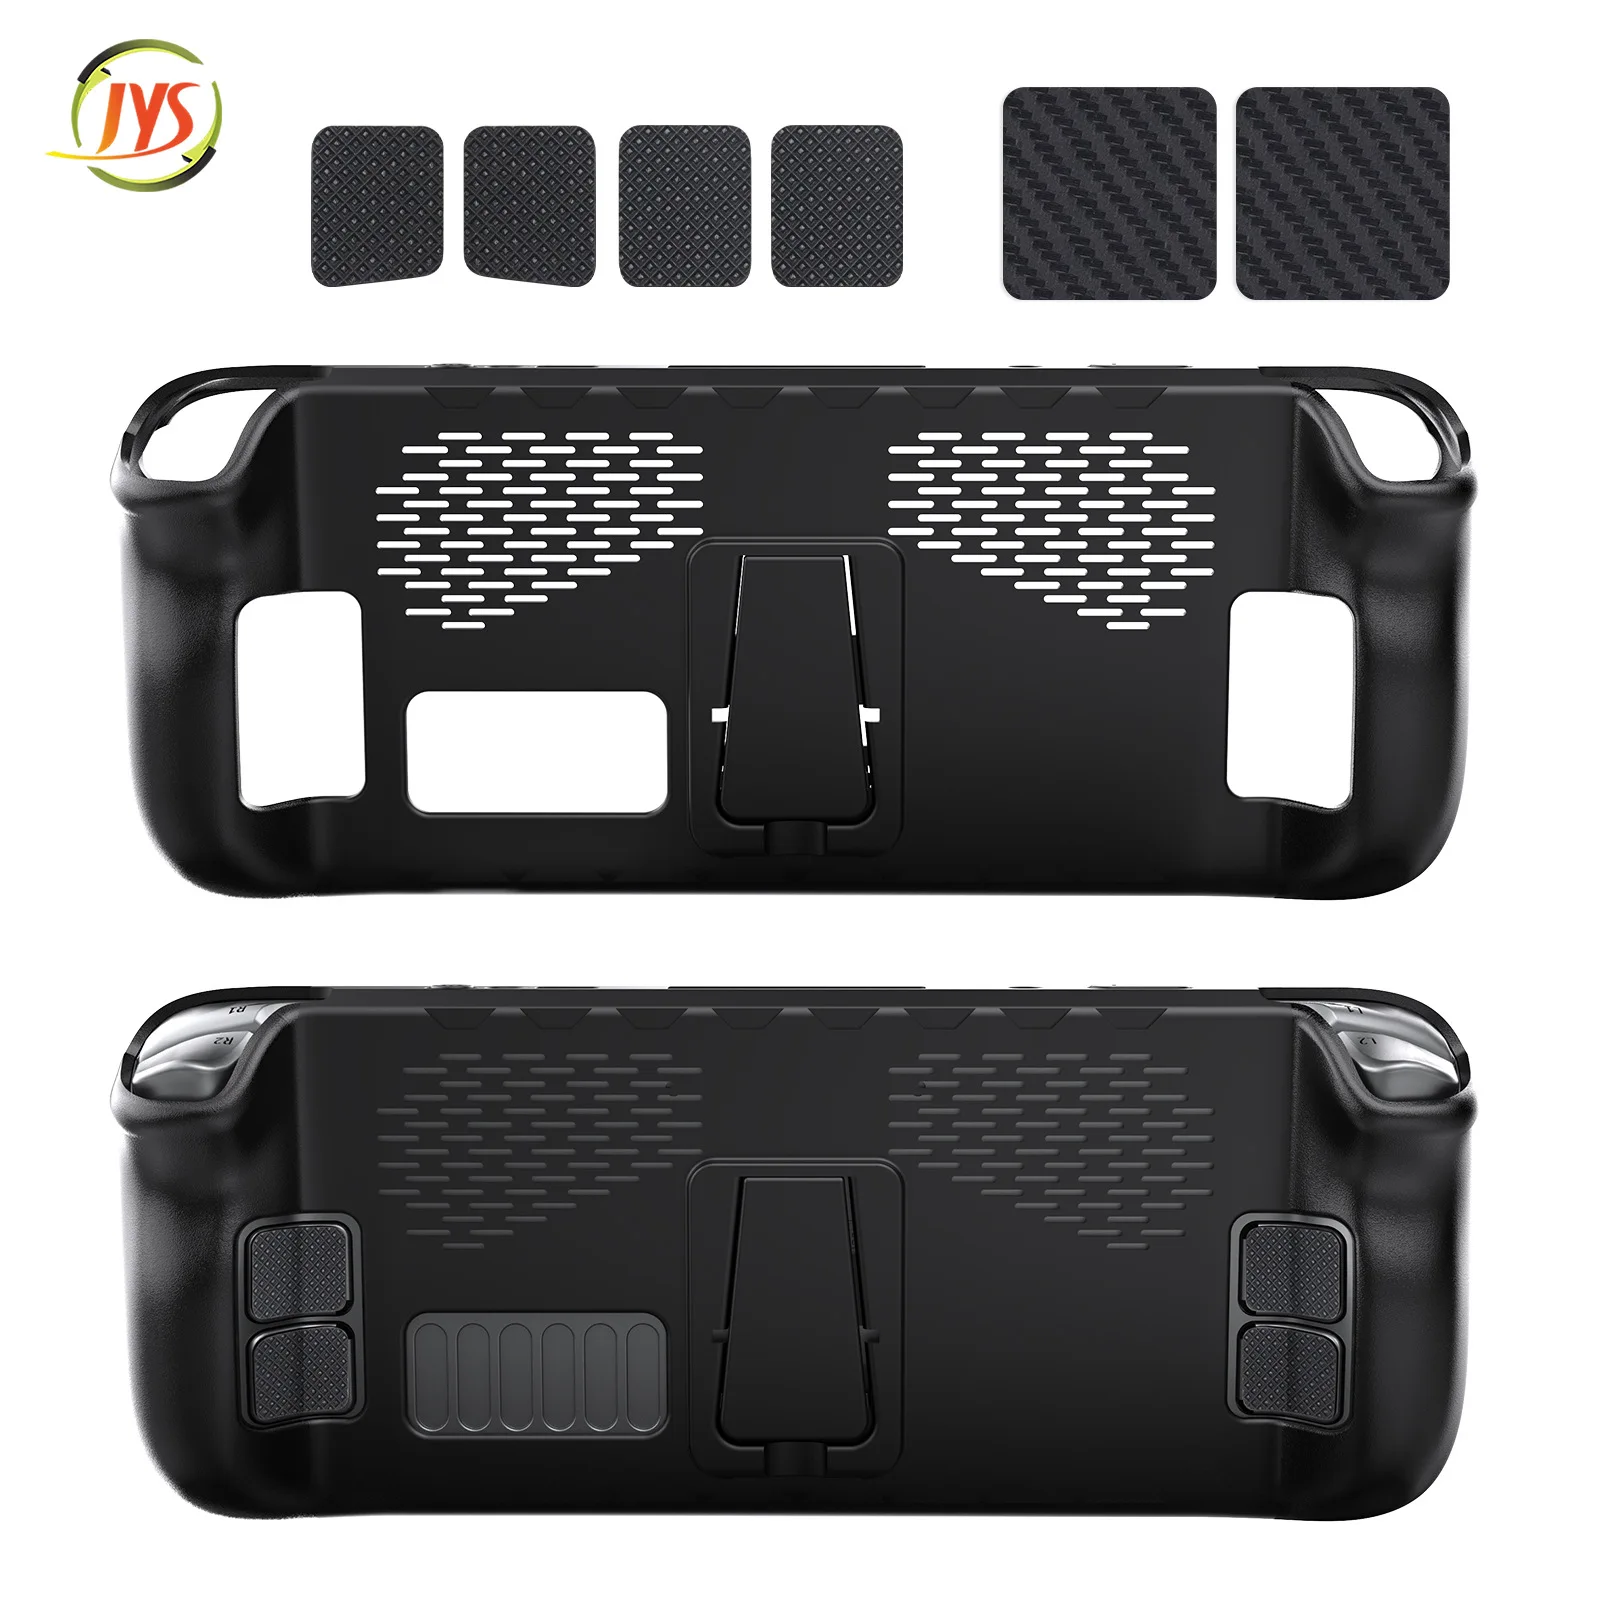 For New Steam Deck handheld TPU Case for Steam Deck Cover Fashion Protective Cases With the support Trackpad button sticker set enlarge